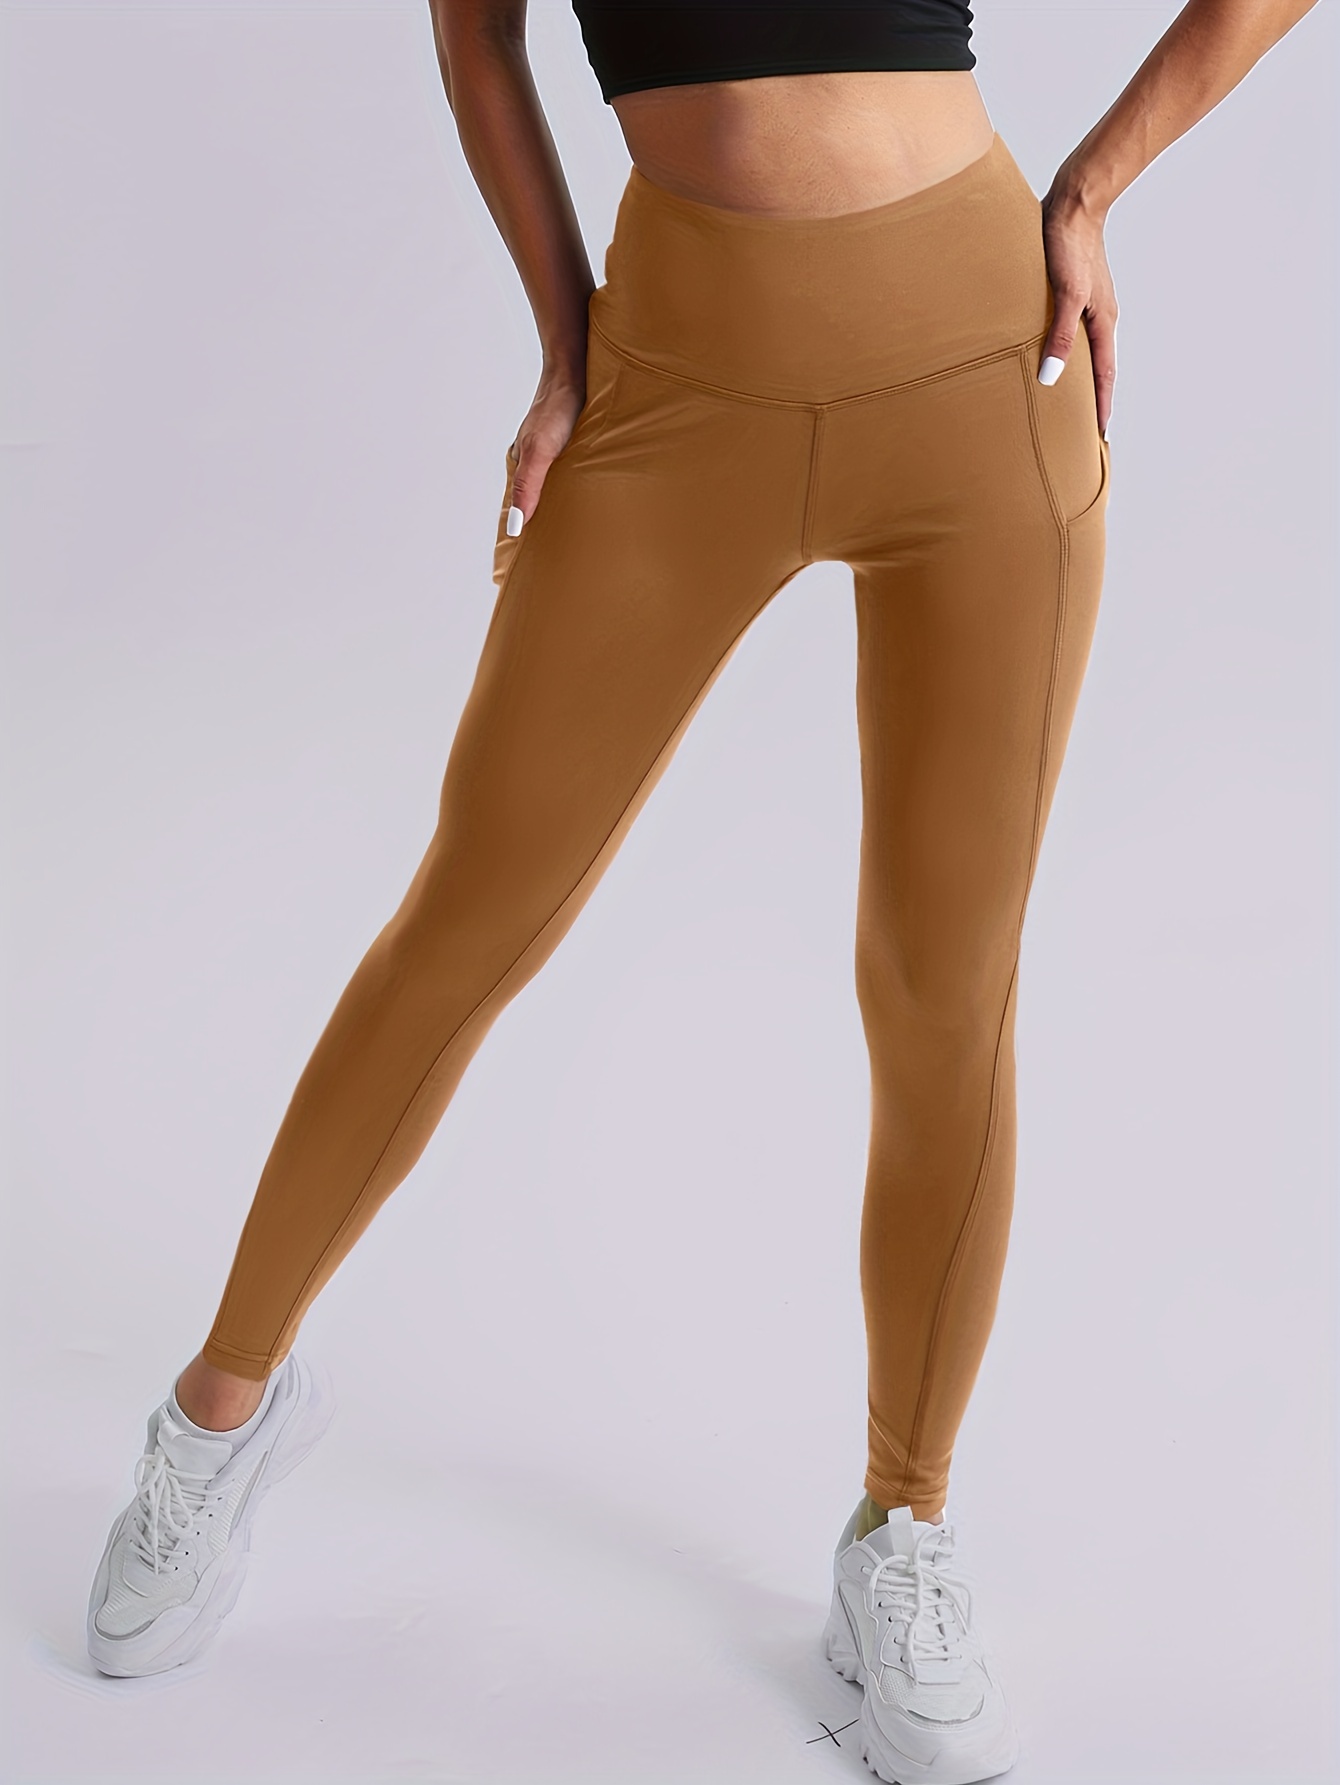 Woman Within Casual Athletic Leggings for Women